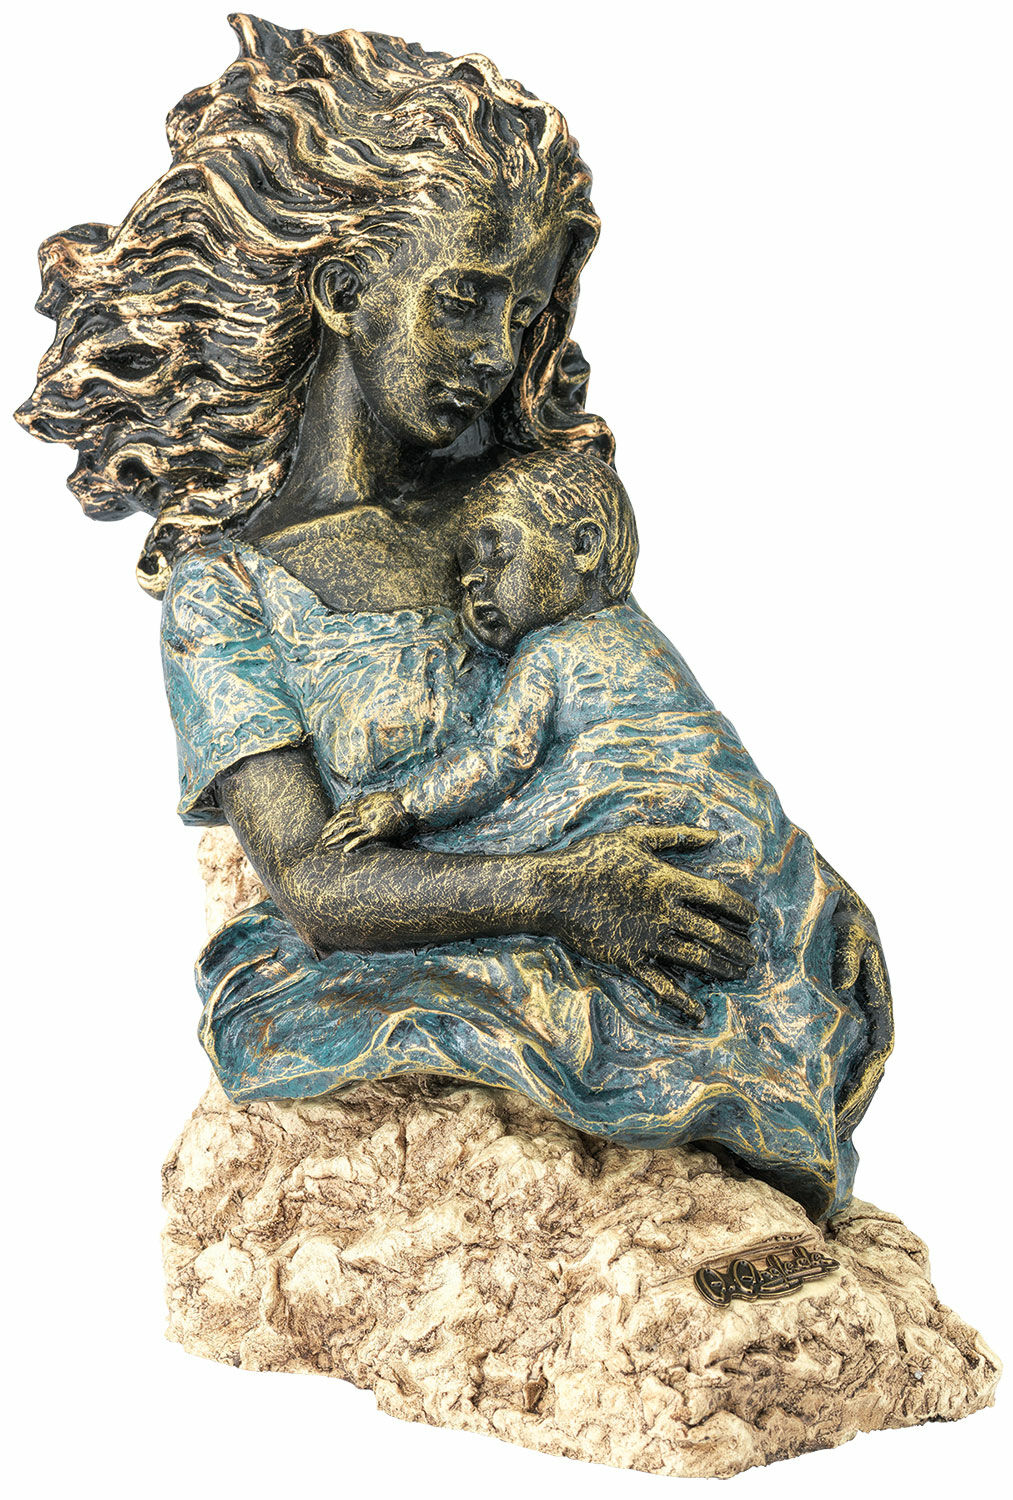 Sculpture "Motherly Love", artificial stone by Angeles Anglada